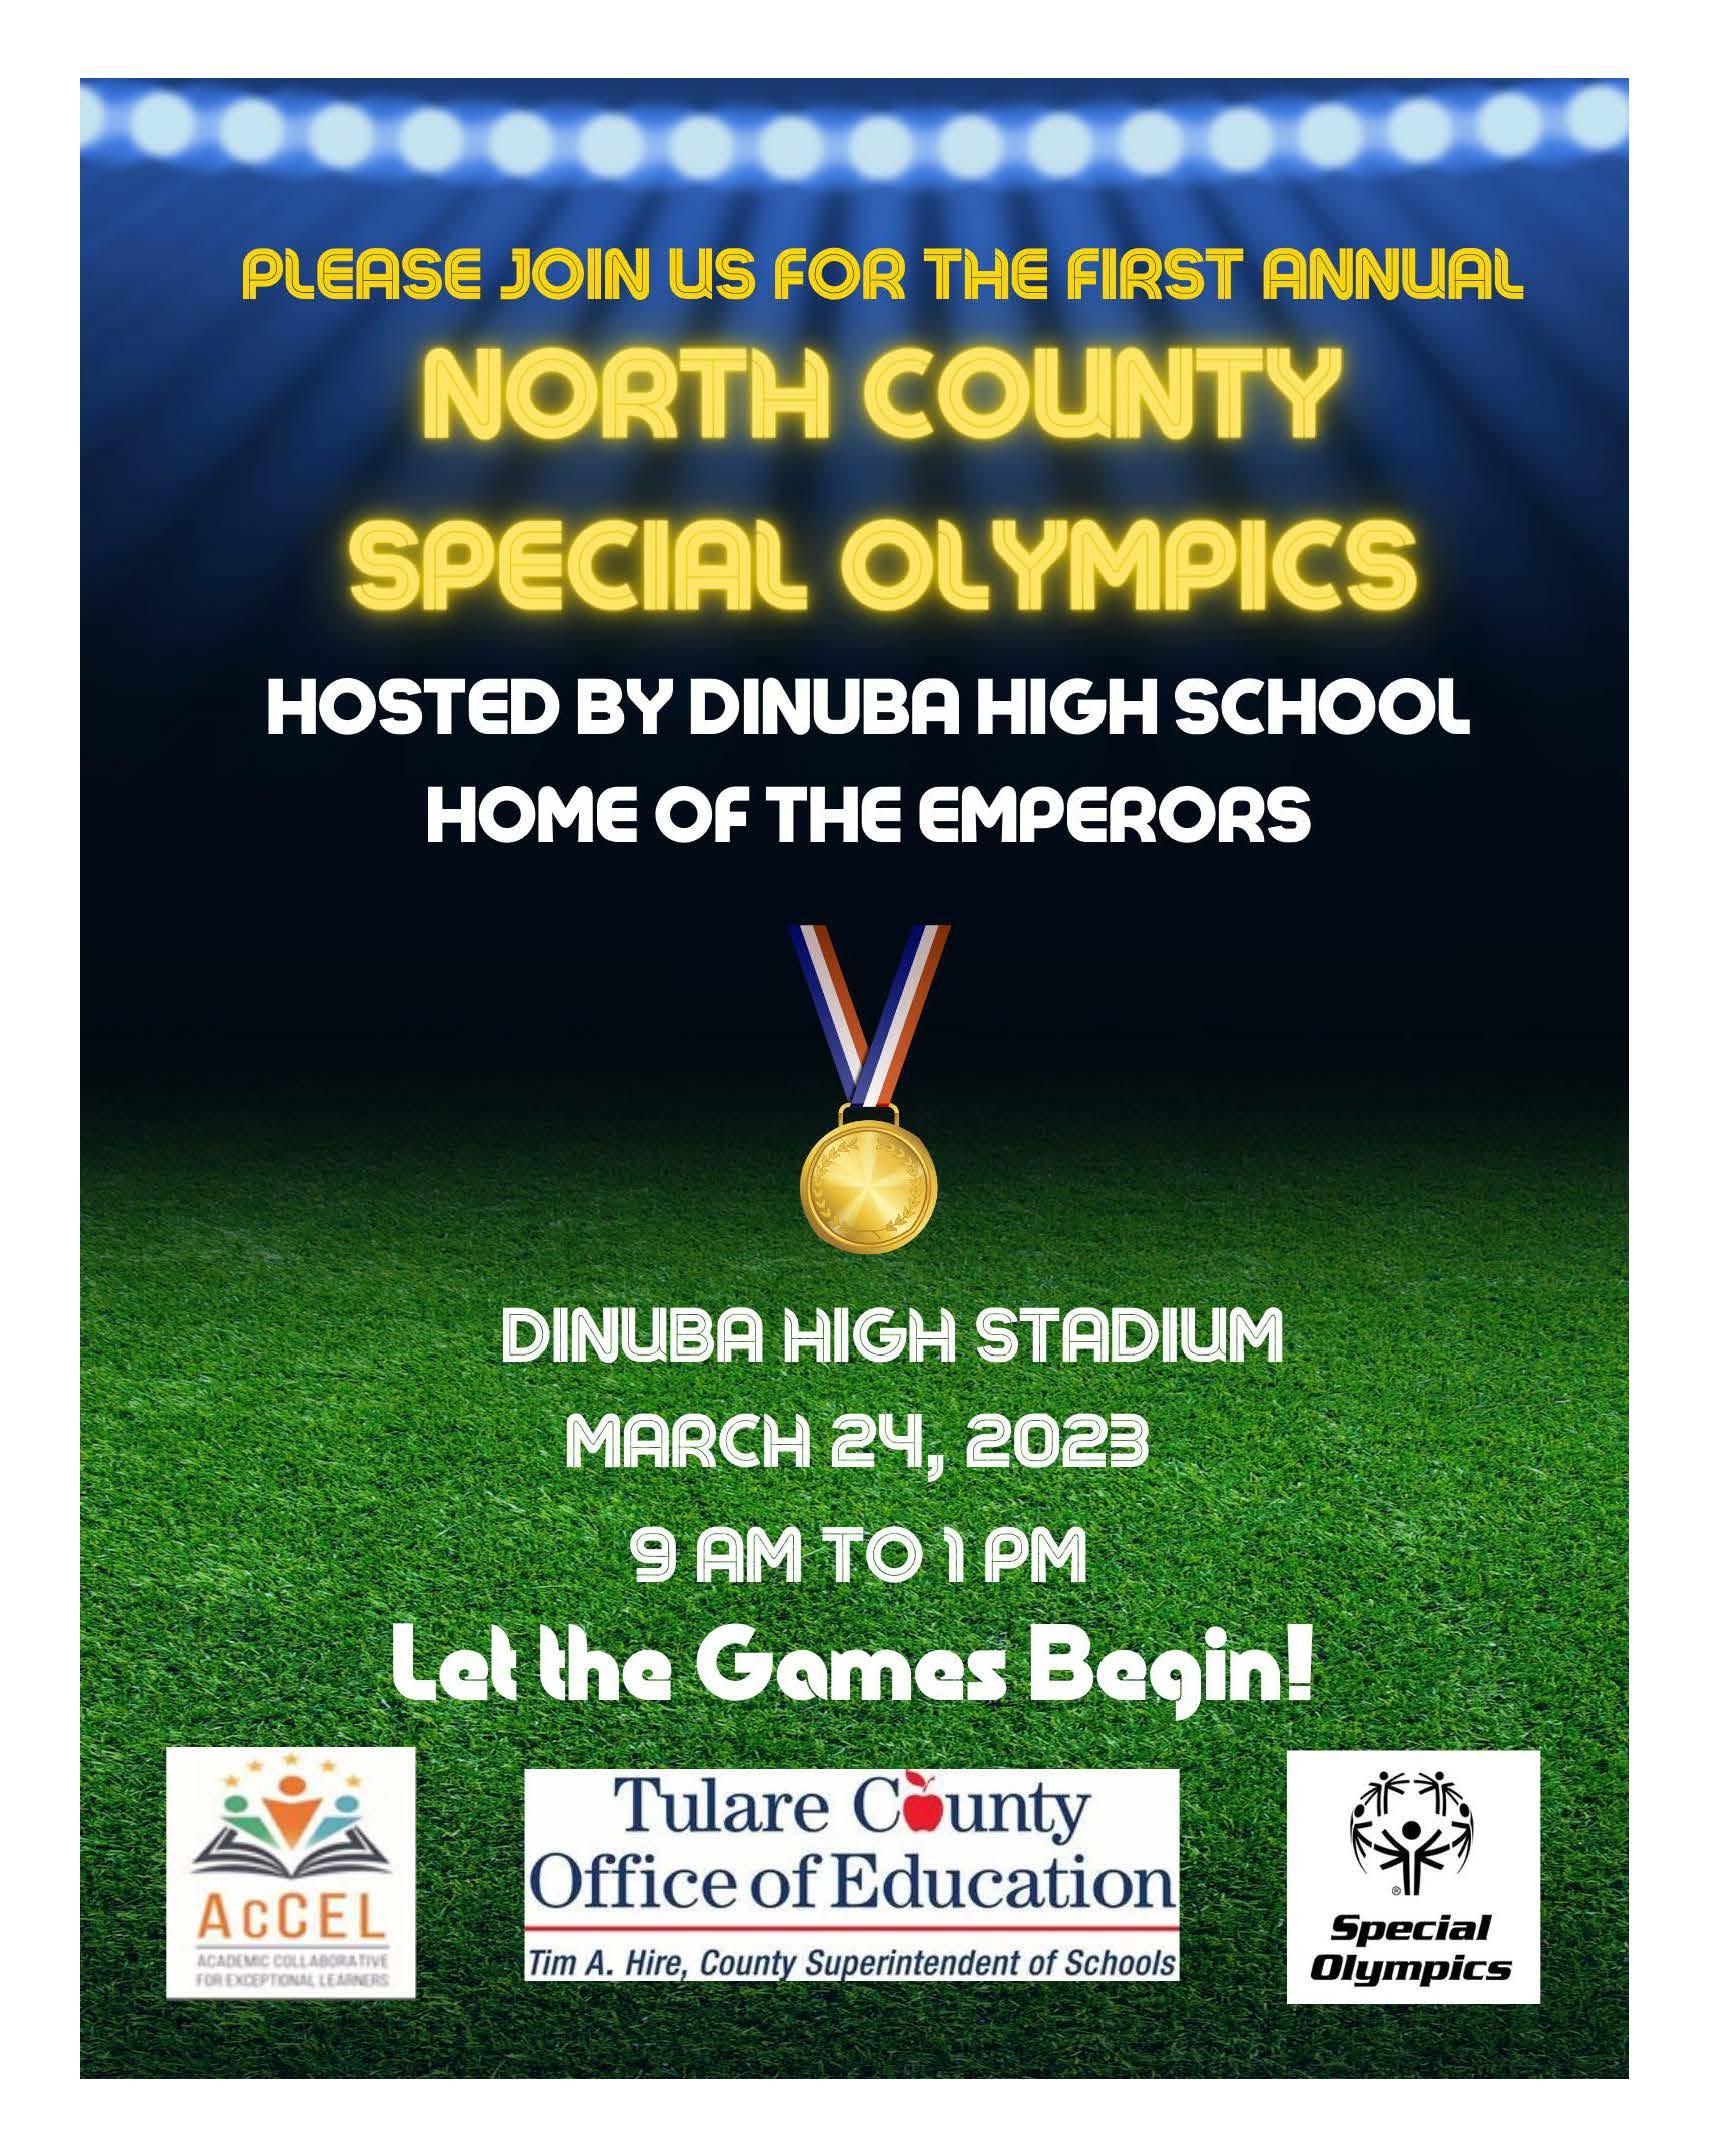 special olympics event flyer 3-2-2023